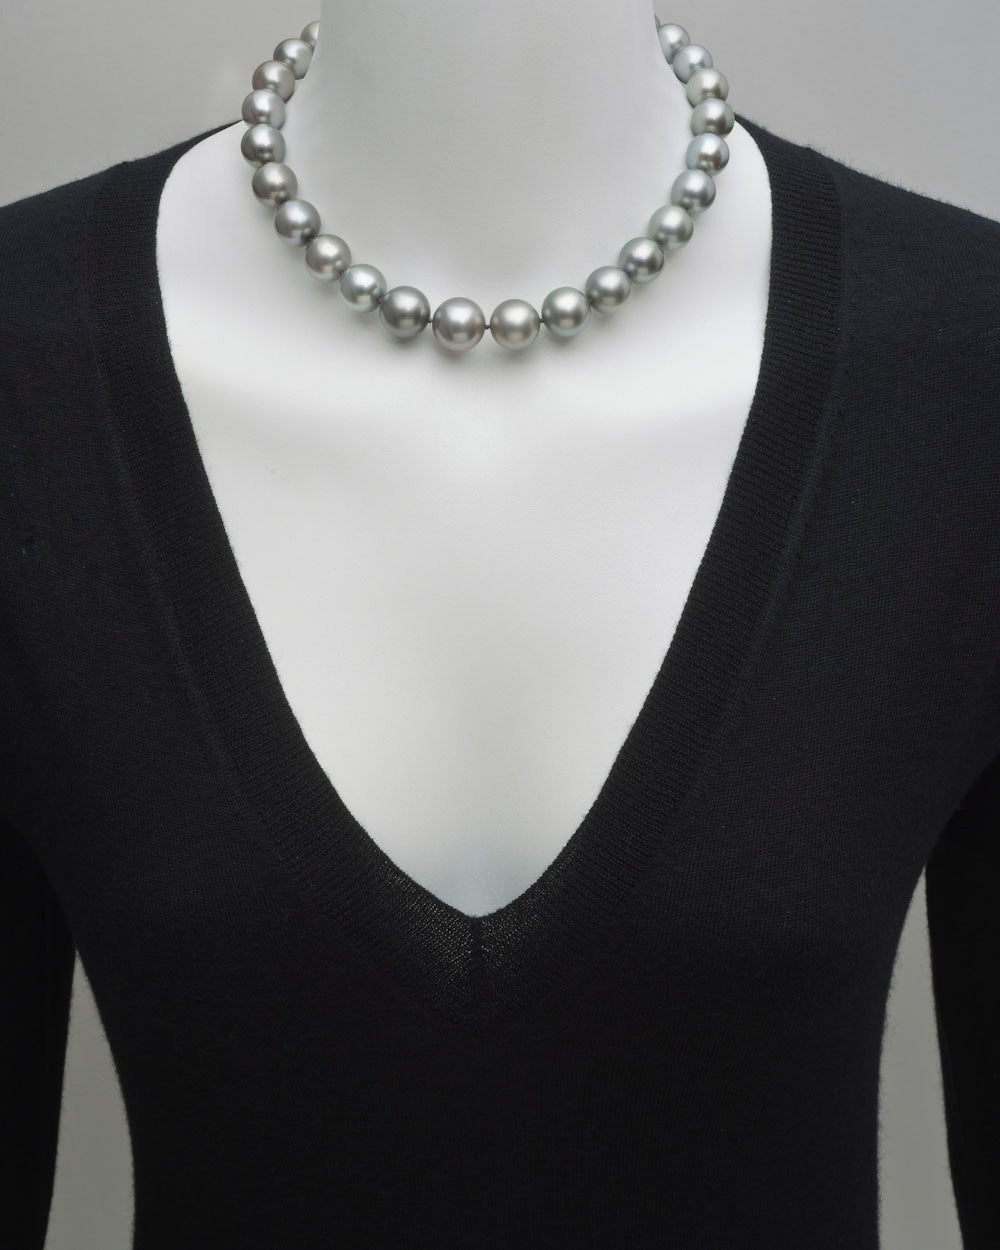 South Sea pearl necklace, composed of 29 gray-toned South Sea pearls, ranging from 11.5 to 15.5mm in diameter, strung on a silk cord, with a 10.7mm pavé diamond ball clasp, mounted in platinum. 16